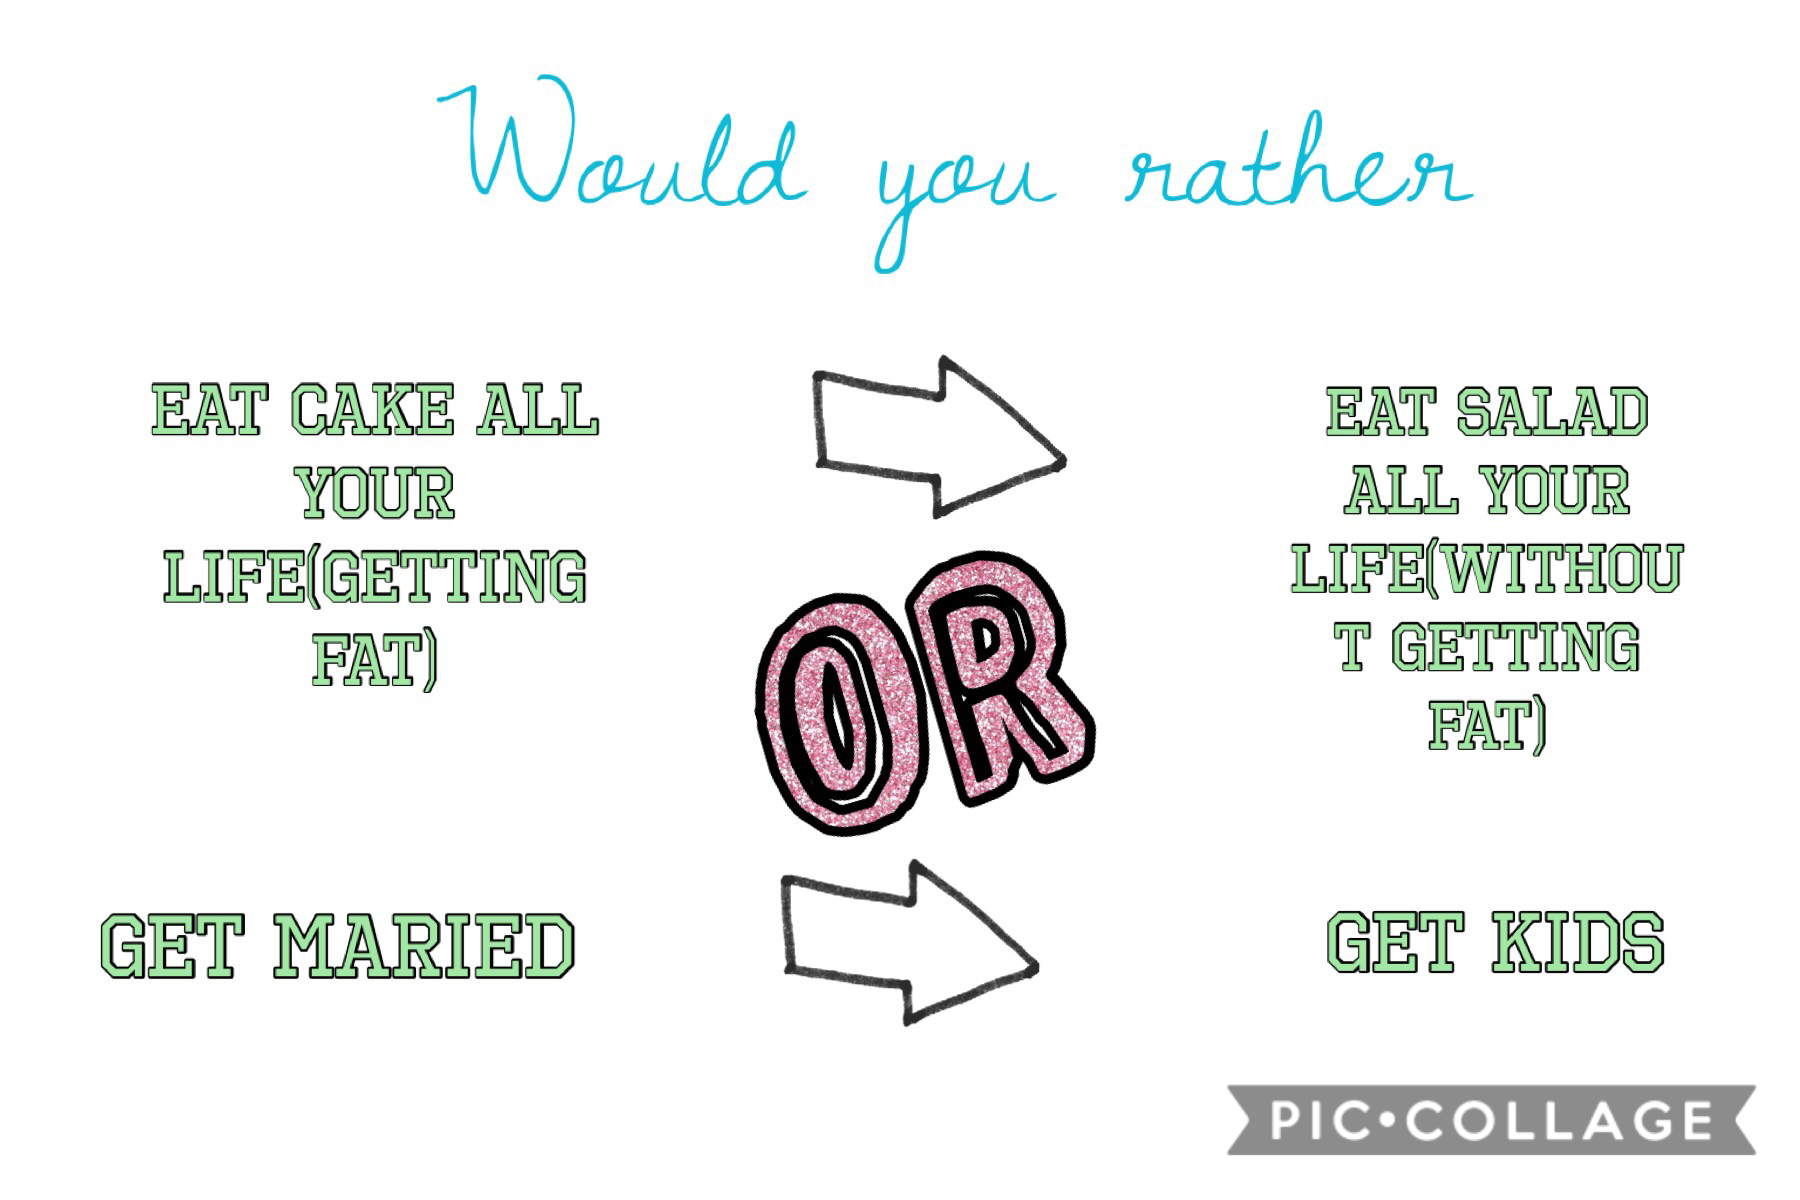 Would you rather...
Comment down below if you like this kinda stuff!